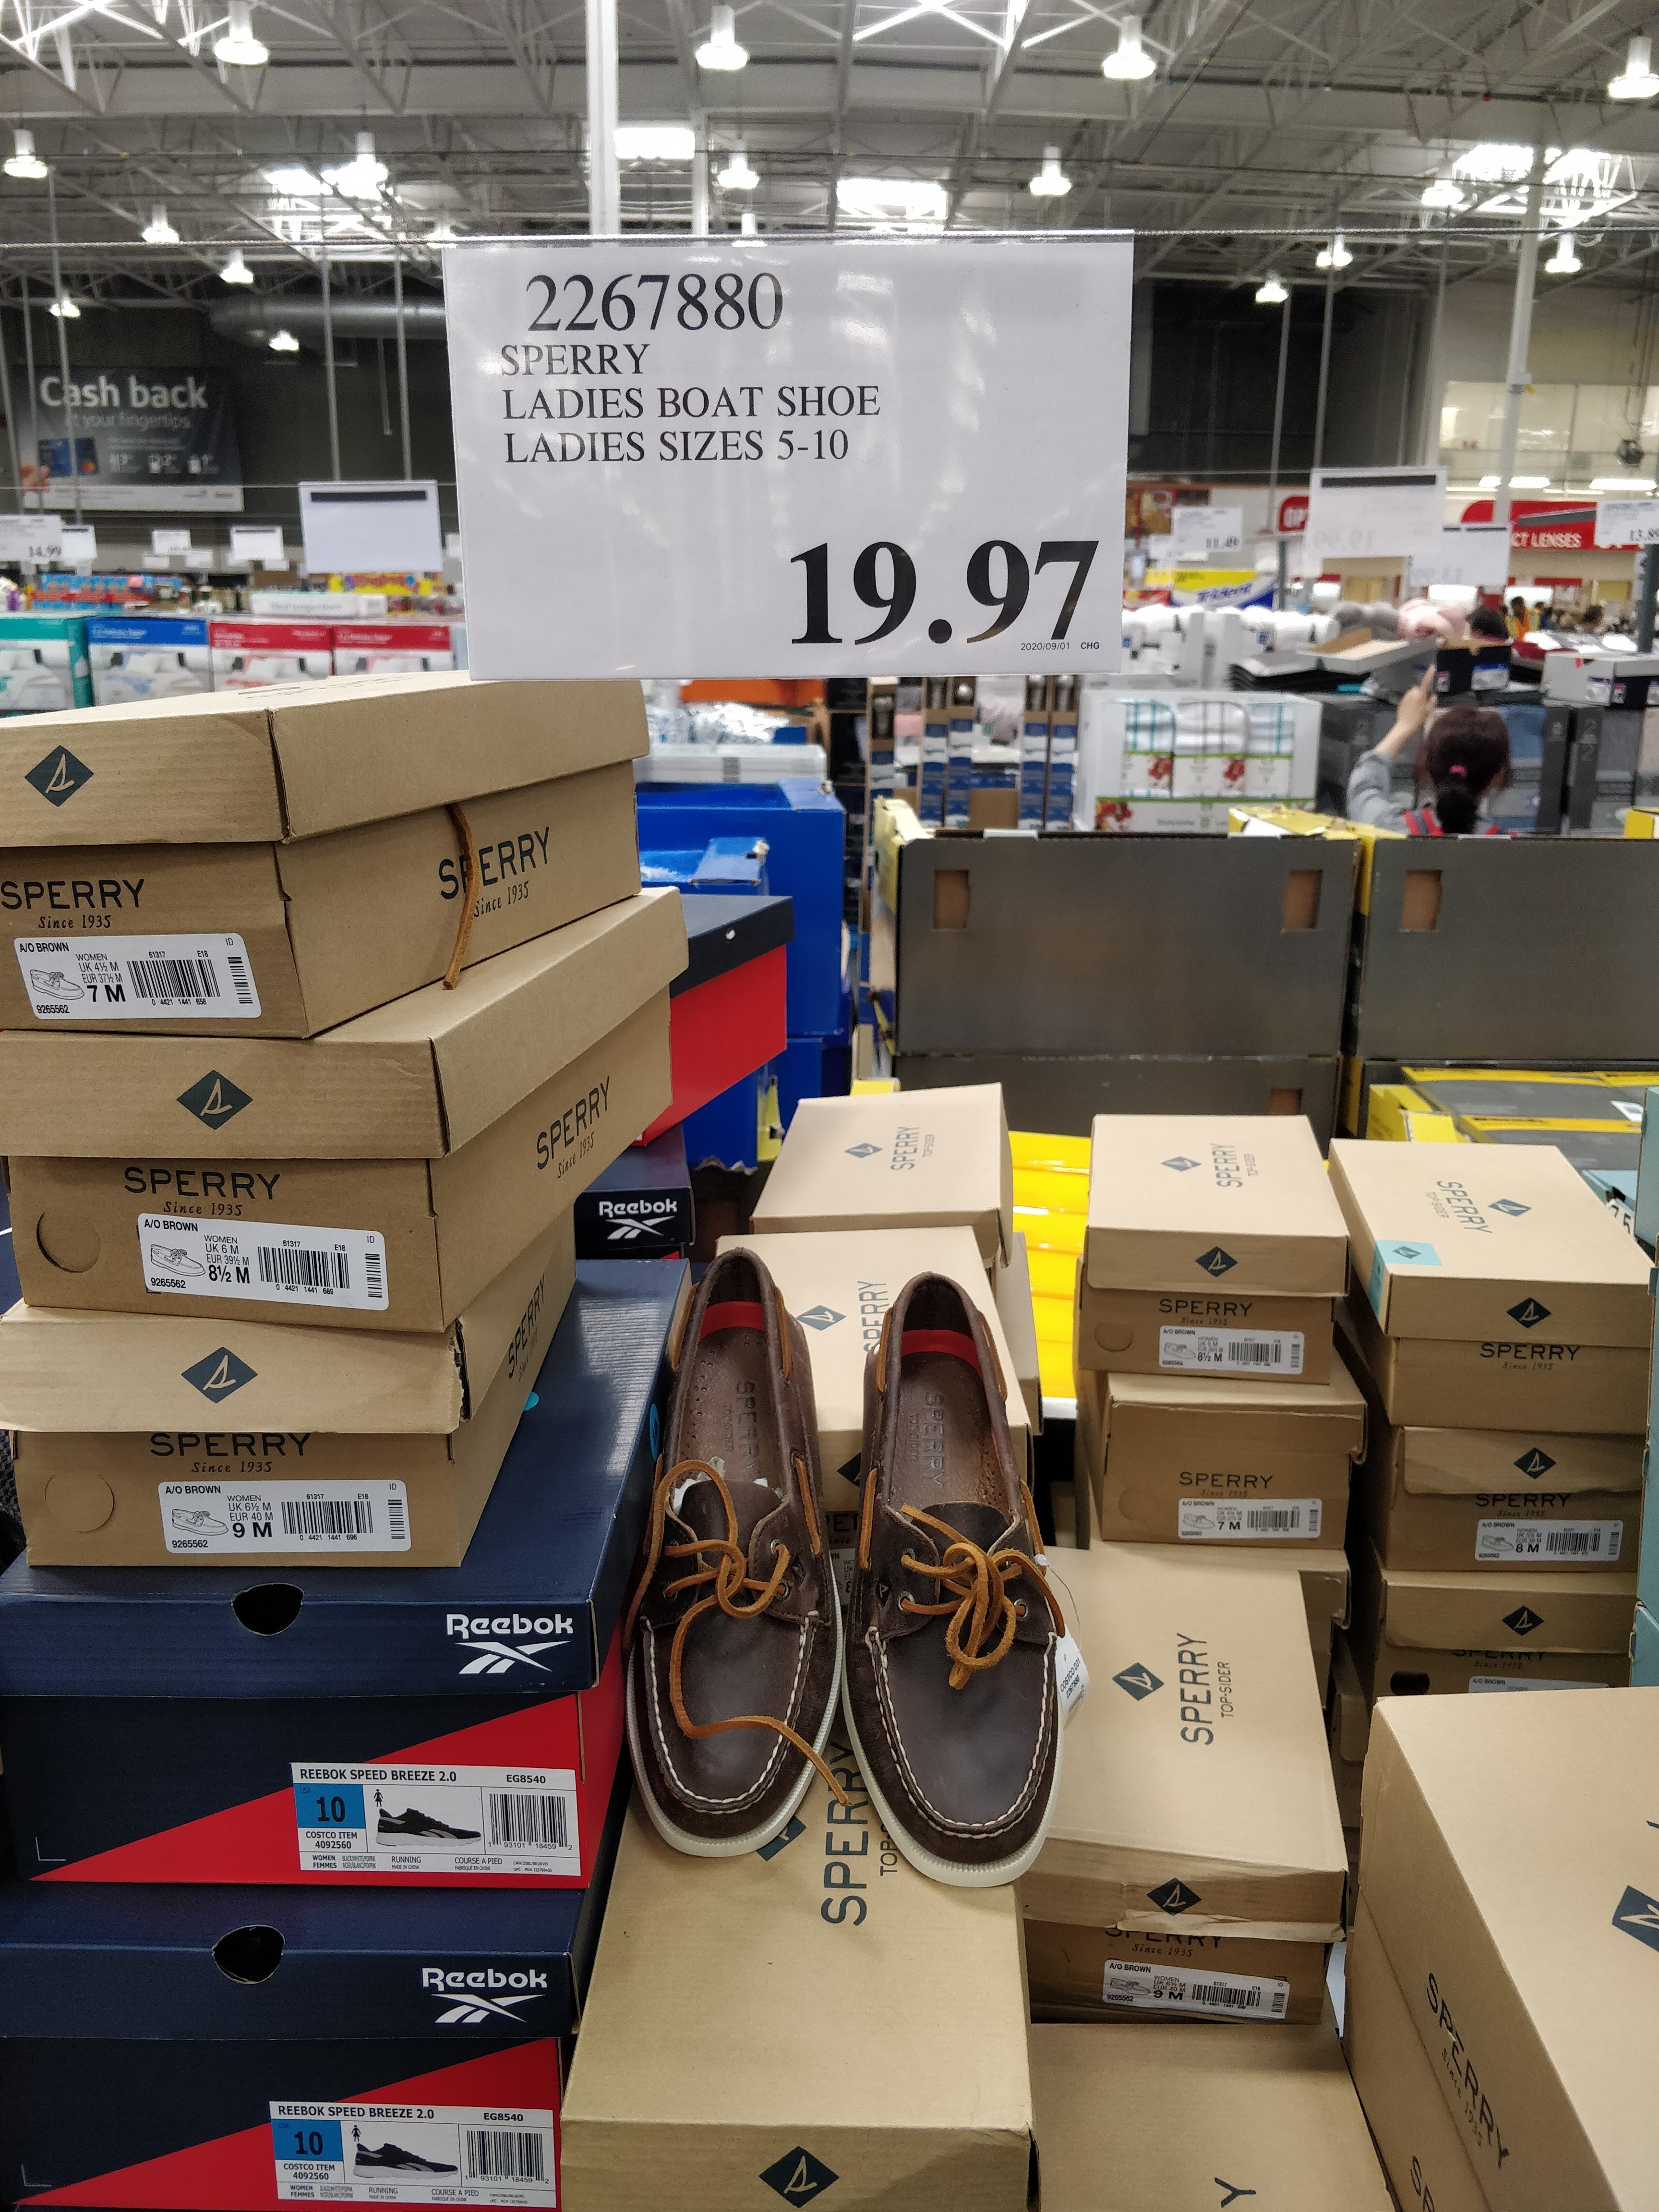 Costco] Costco Sperry boat shoes ladies   Forums